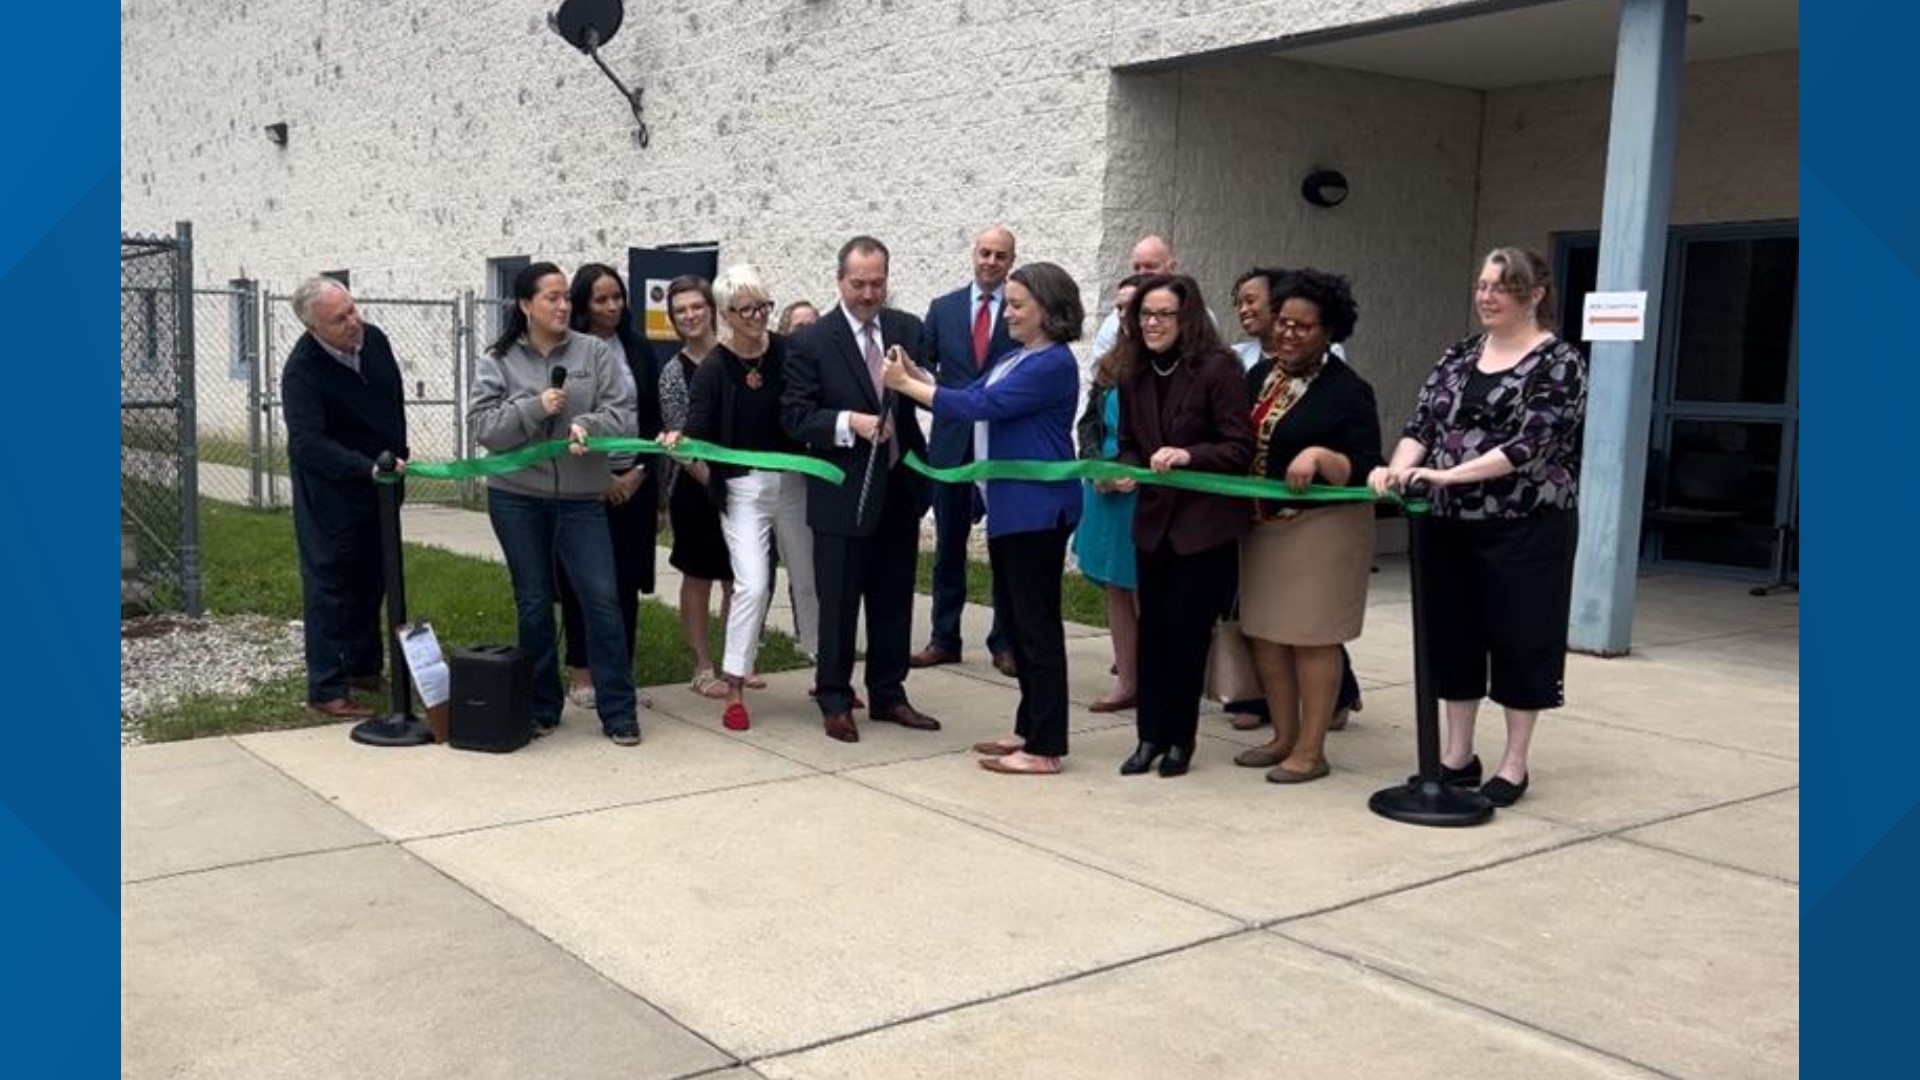 On Thursday York County Reentry Coalition (YCRC) opened its Reentry Opportunity Center (ROC) located at the rear of York County Prison.